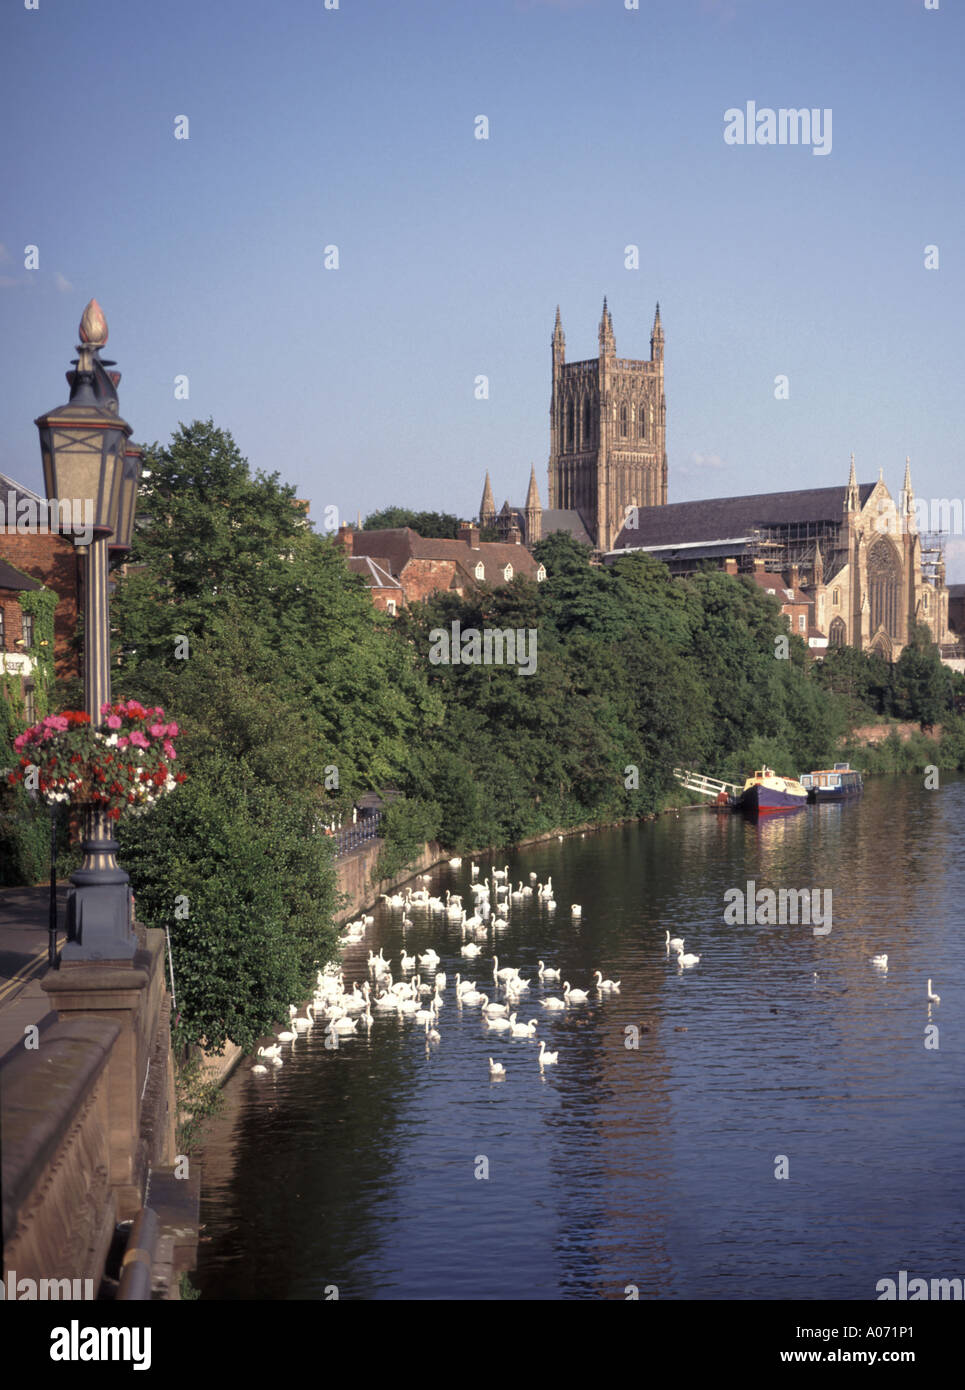 Large flock of swans on the River Severn historical Anglican Worcester Cathedral & Tower beyond seen on sunny blue sky day Worcestershire England UK Stock Photo